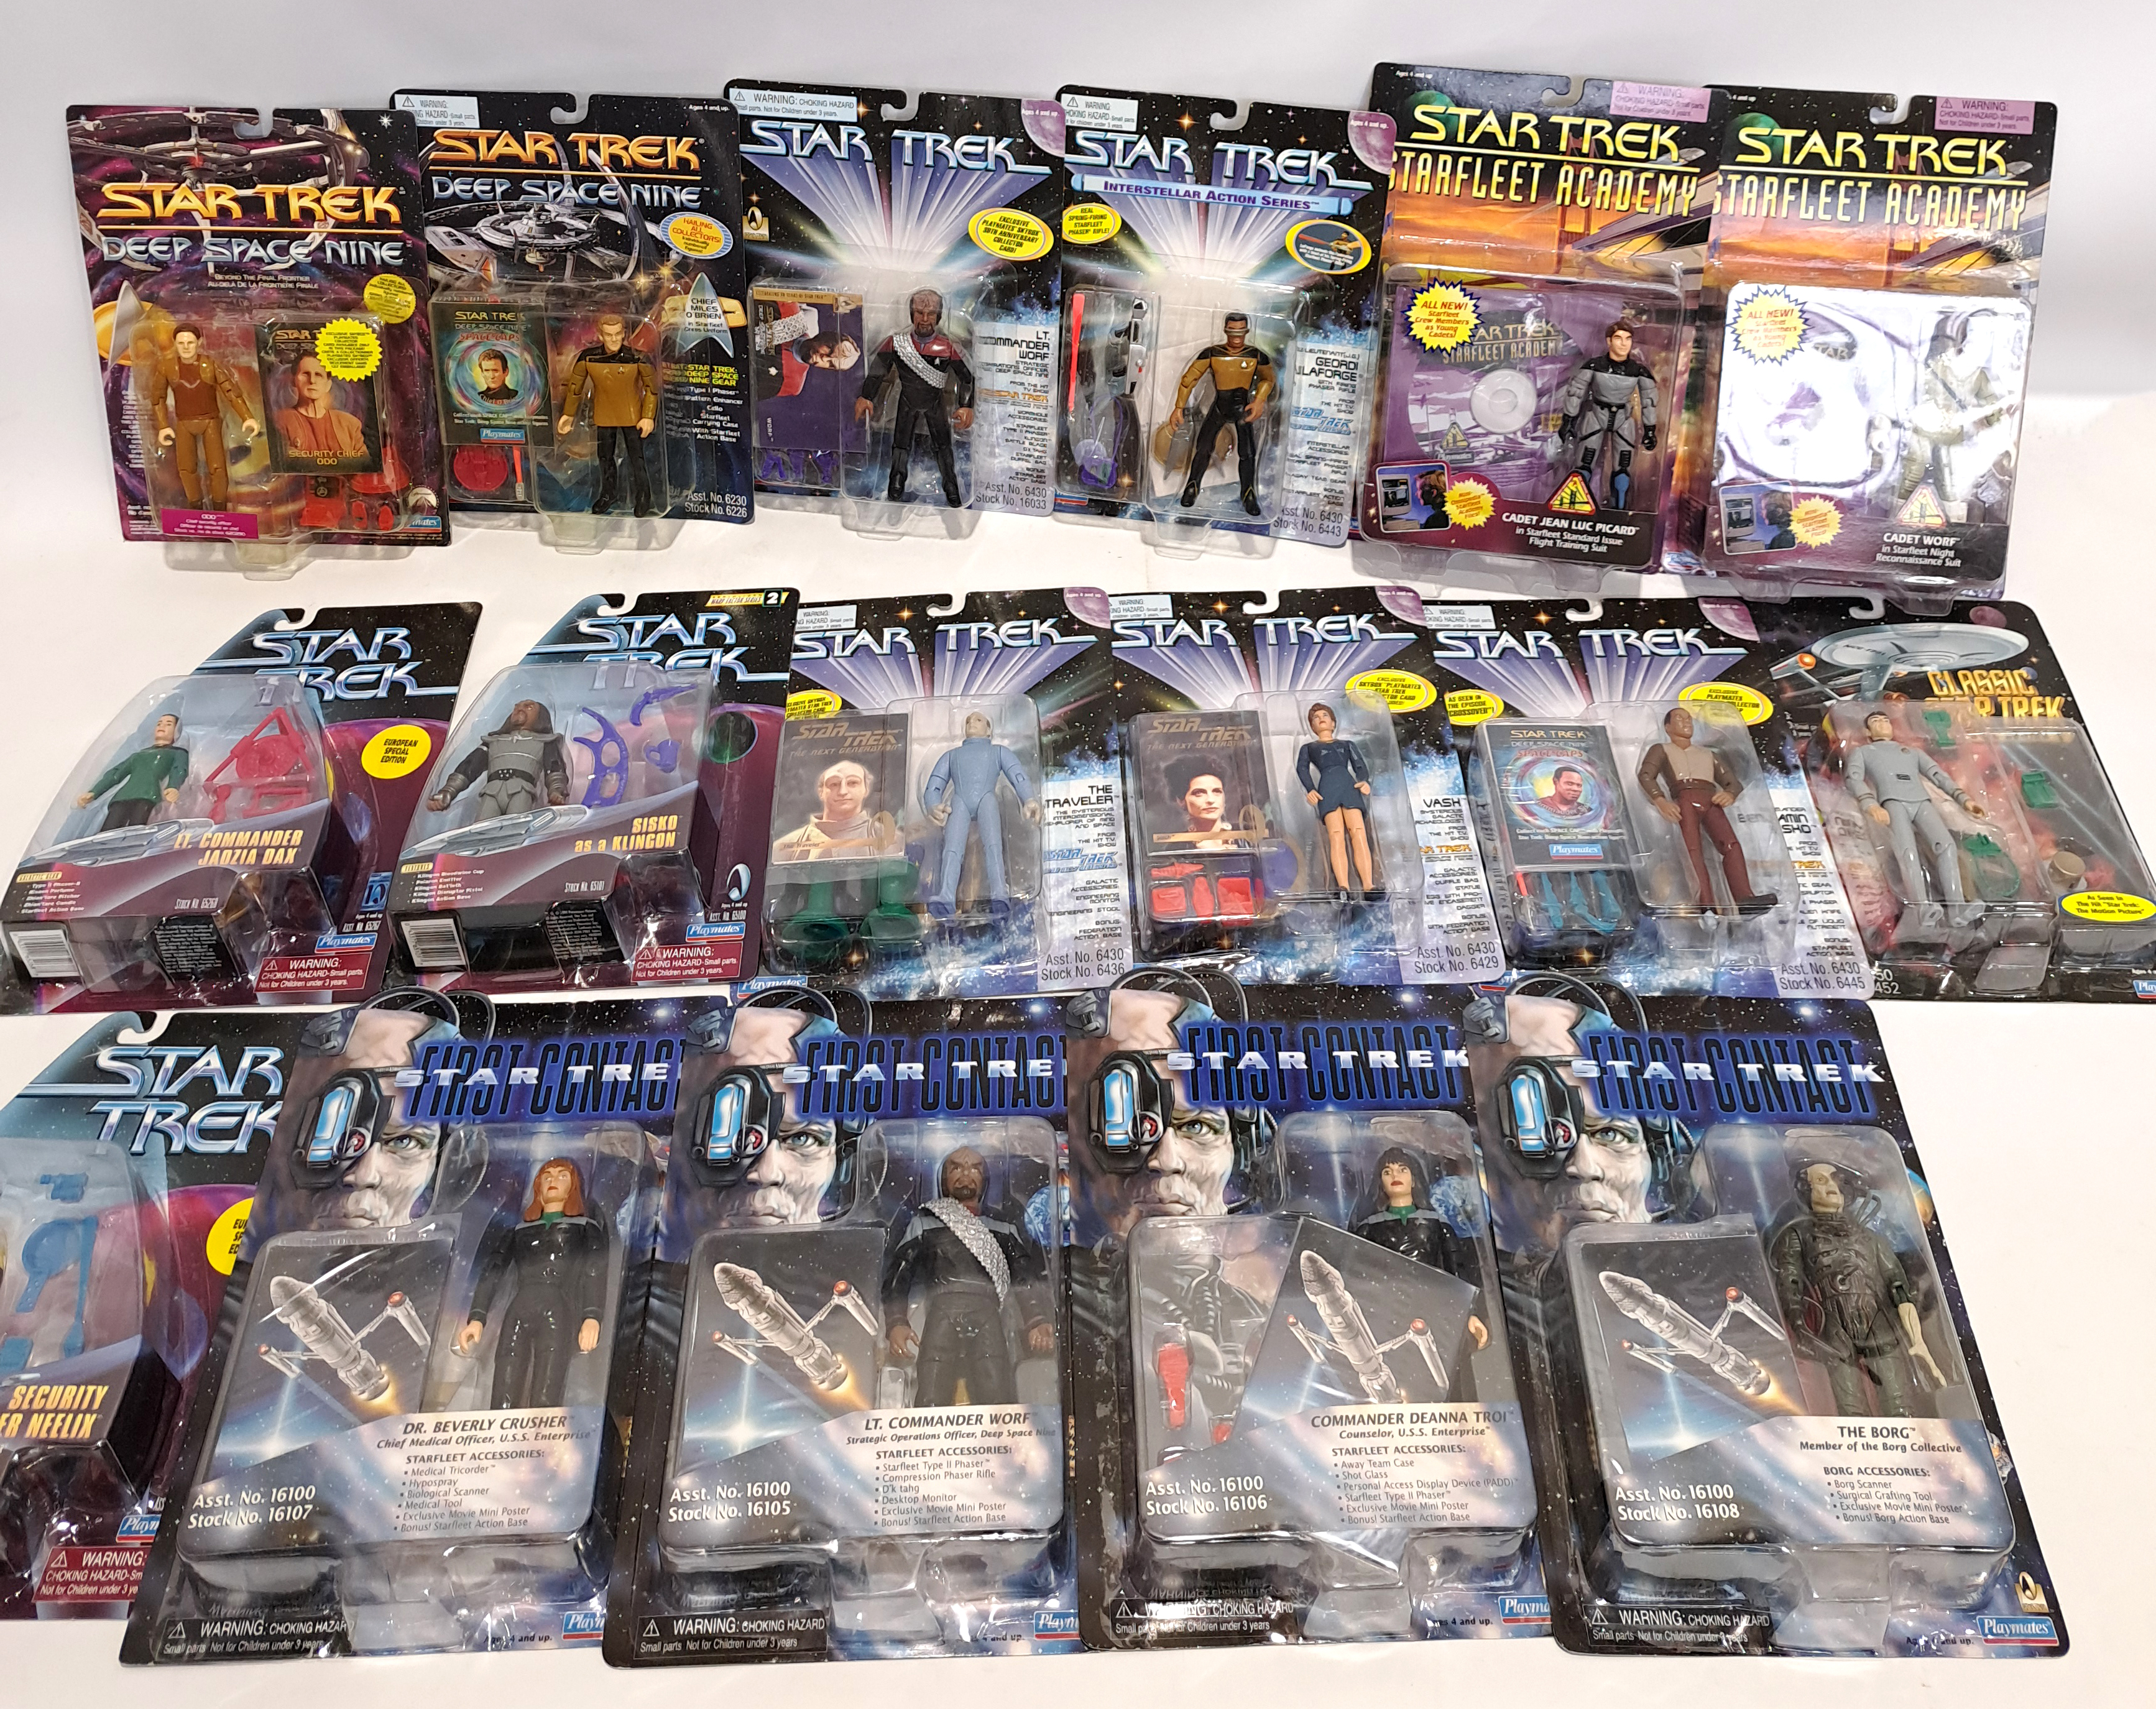 Quantity of Playmates Star Trek Carded Action Figures